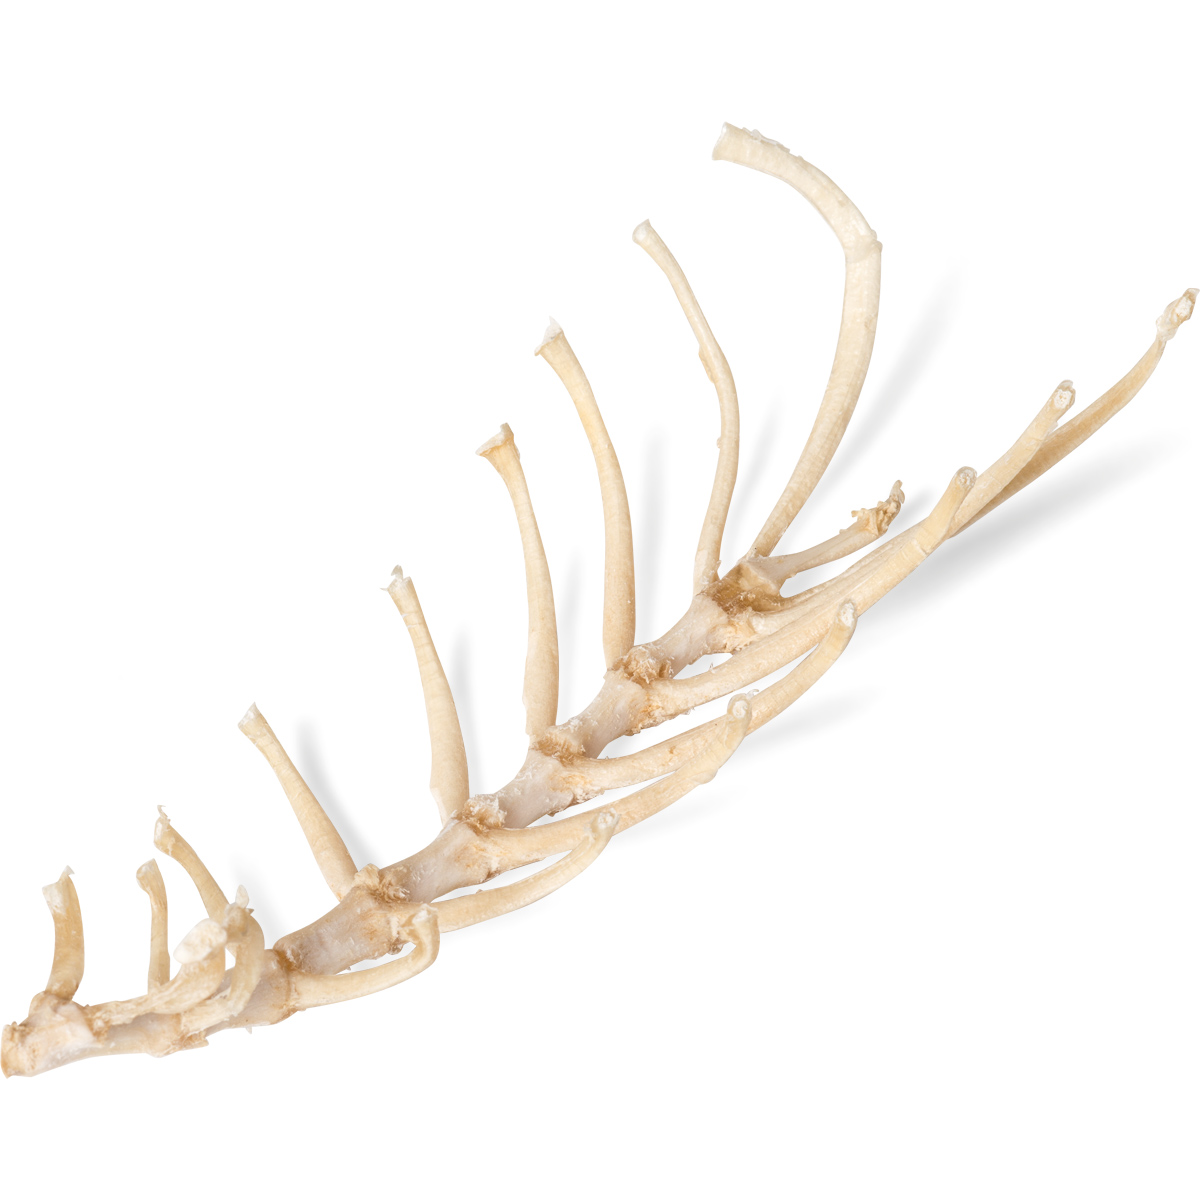 Dog (Canis lupus familiaris), sternum - 1021061 - T30064 - Osteology